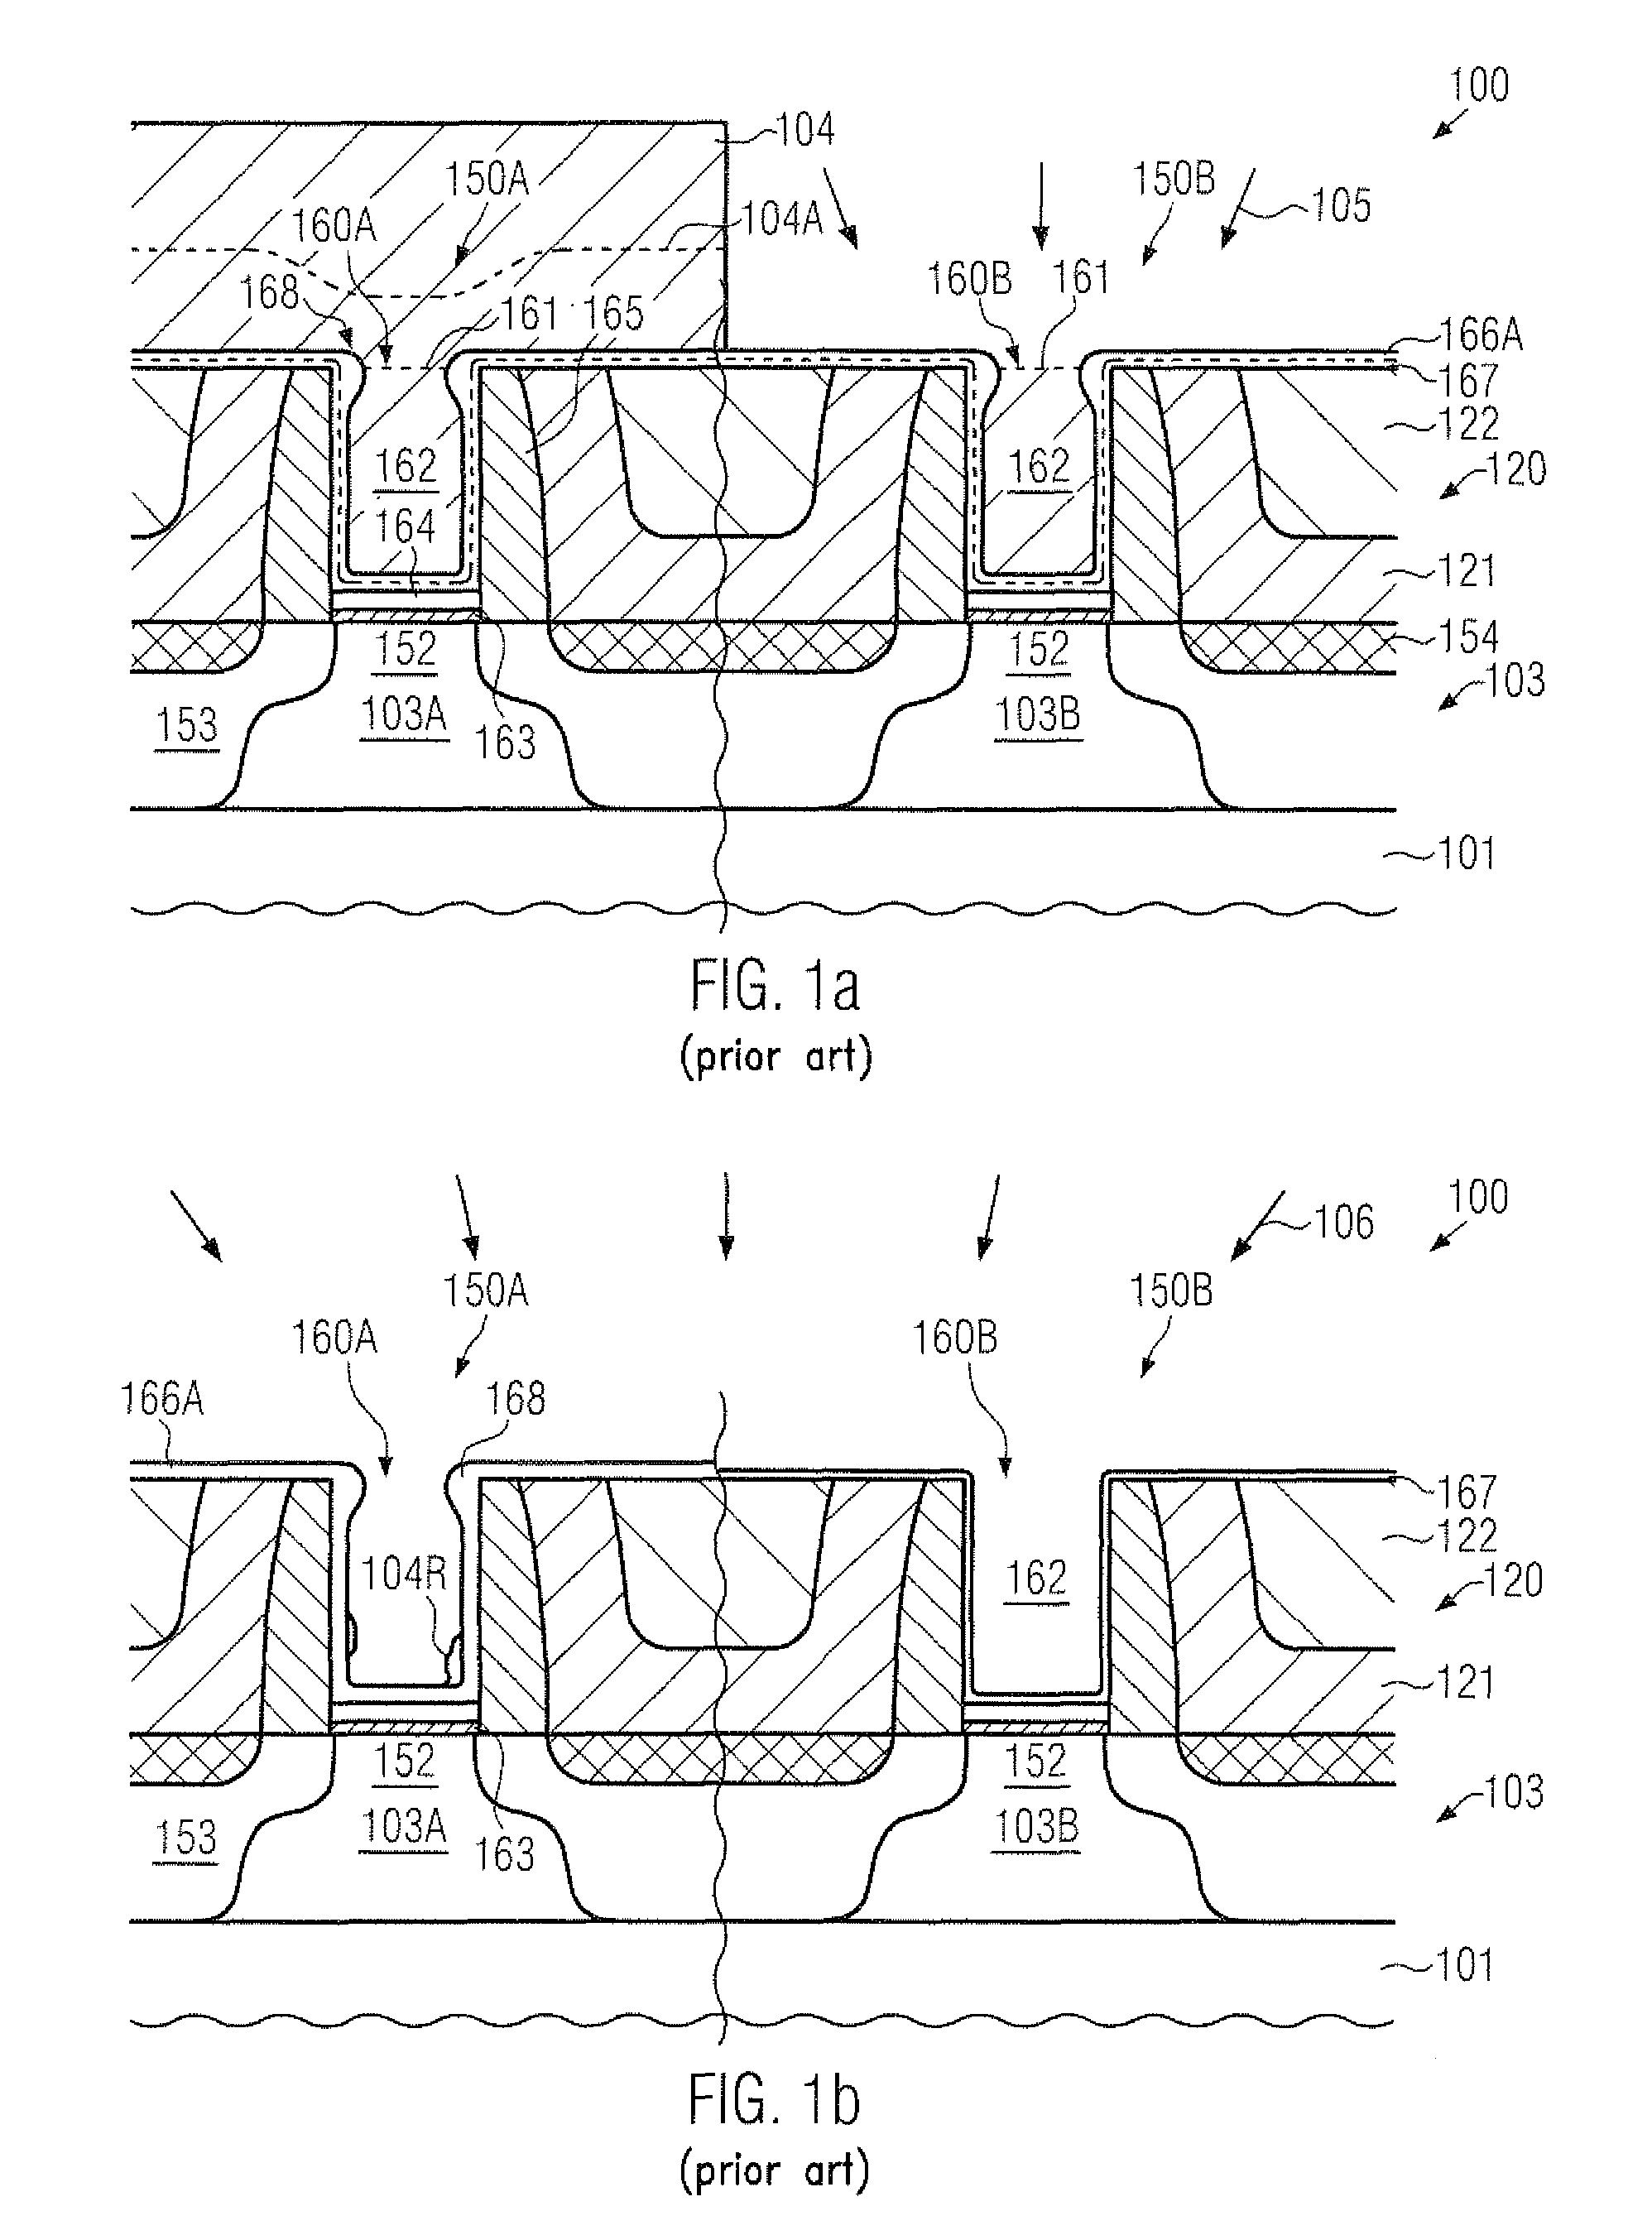 High-K metal gate electrode structures formed by separate removal of placeholder materials using a masking regime prior to gate patterning